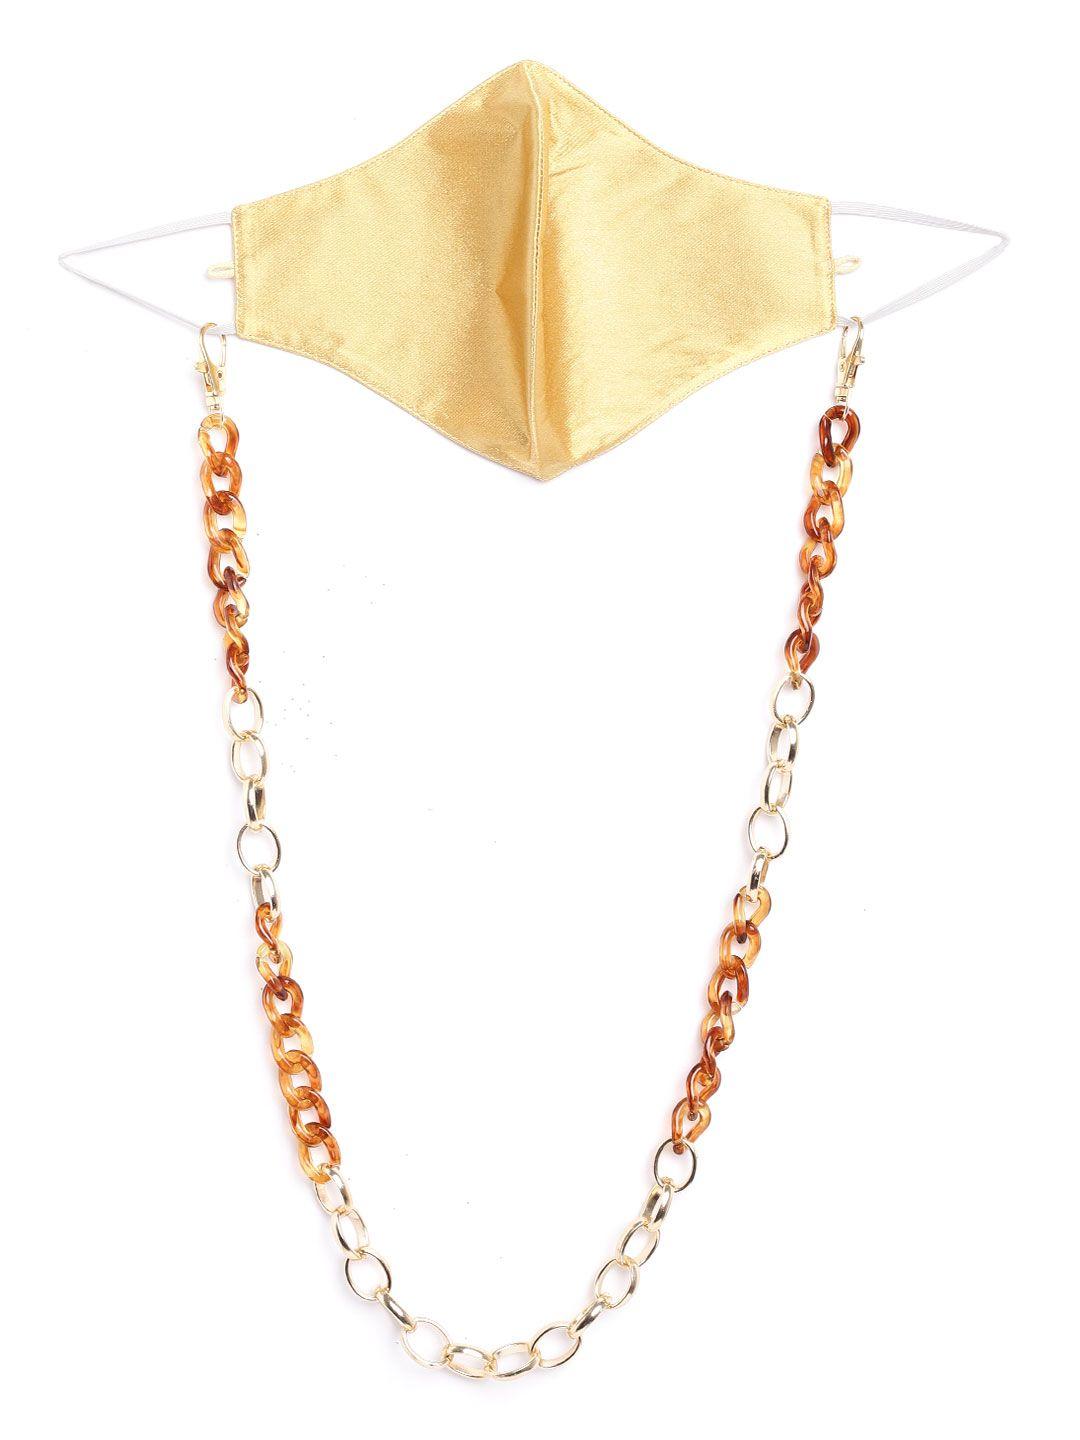 blueberry women gold-toned reusable 2-ply satin mask with detachable resin chain strap